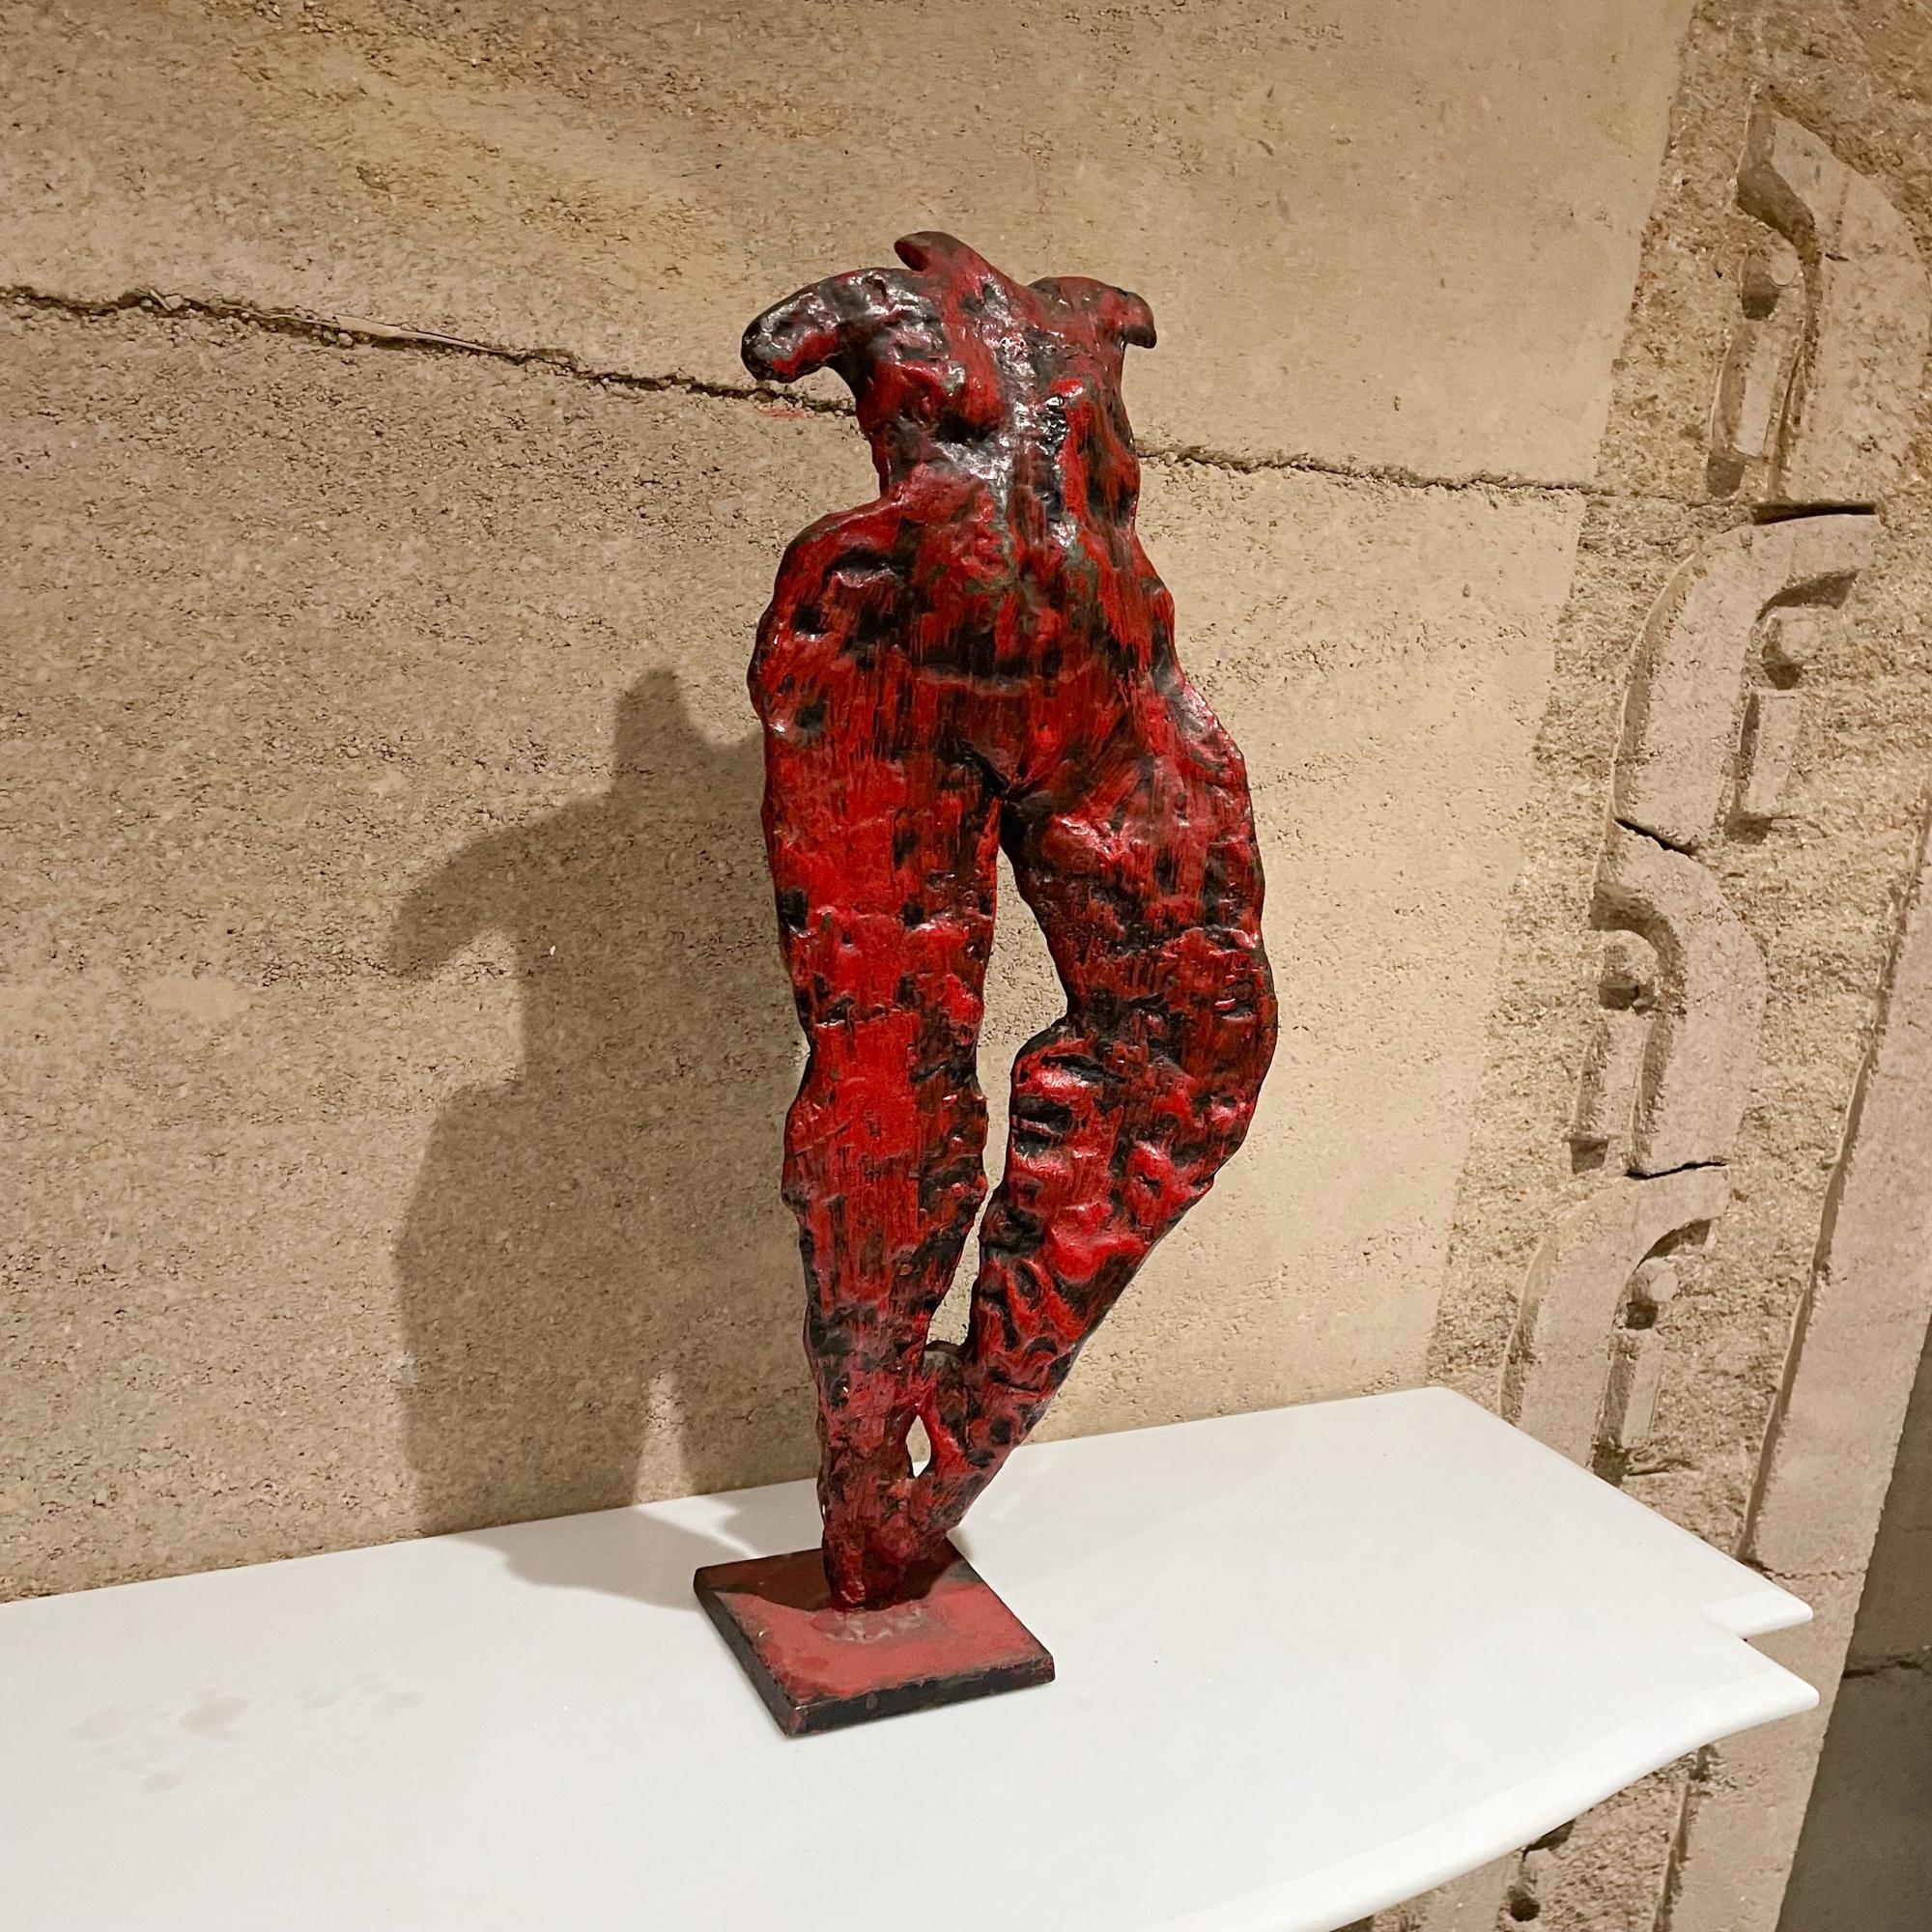 
French modern nude dancers abstract sculpture in red bronze
Heavy Solid Bronze in Red Black patina.
Unmarked. 
Dimensions: 21 H x 8 W x 4.5 D inches.
Made in France circa 1950s.
Very good original unrestored condition. Original red, black patina.